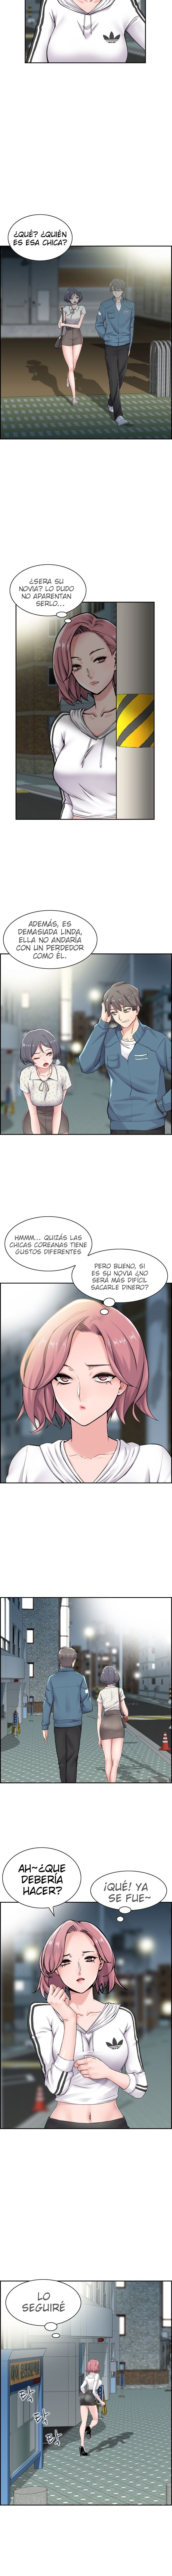 Sister in Law Manhwa Raw - Chapter 9 Page 3